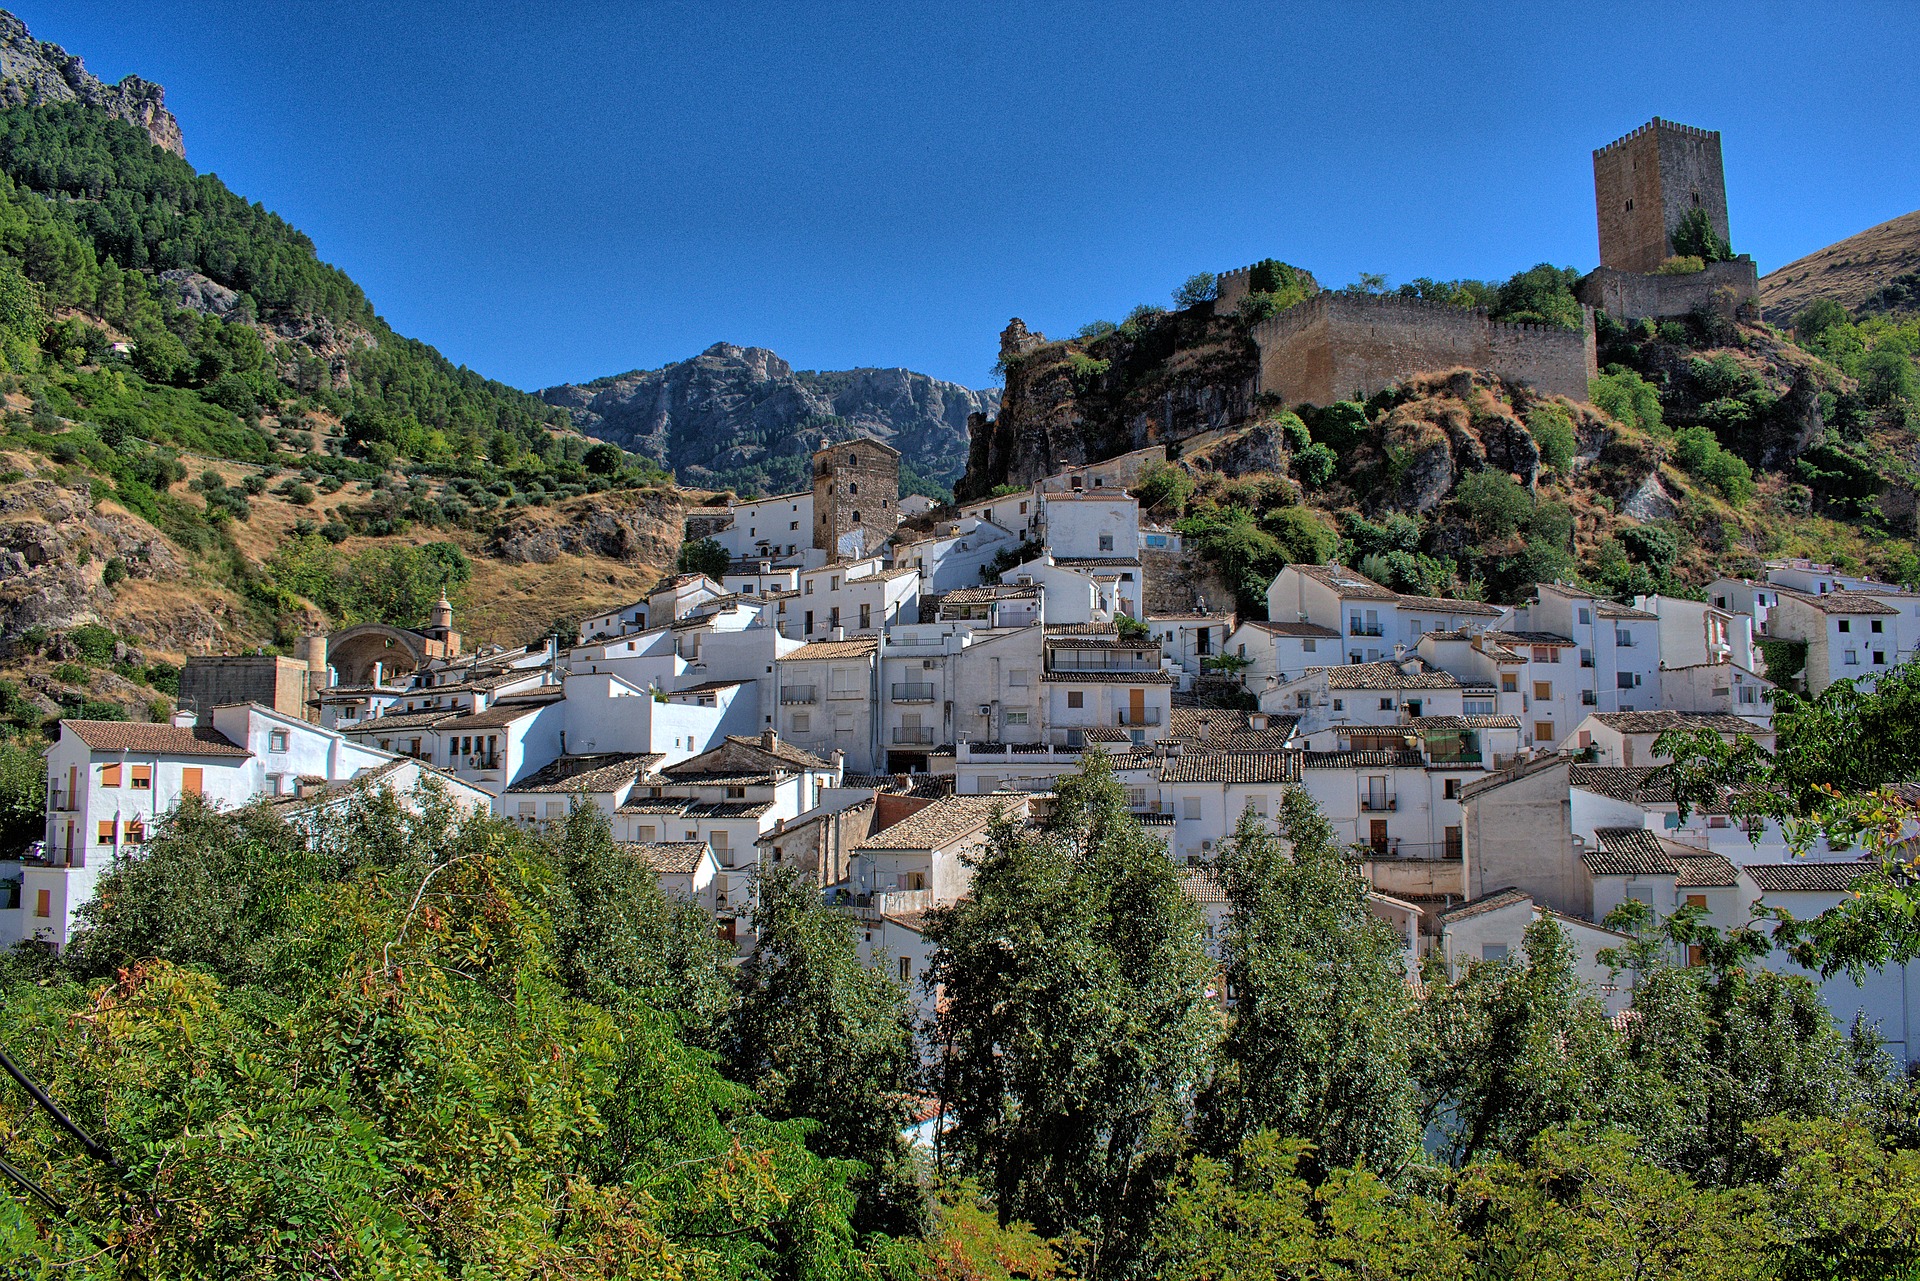 The most beautiful Andalusian village – don’t miss out on Zuheros